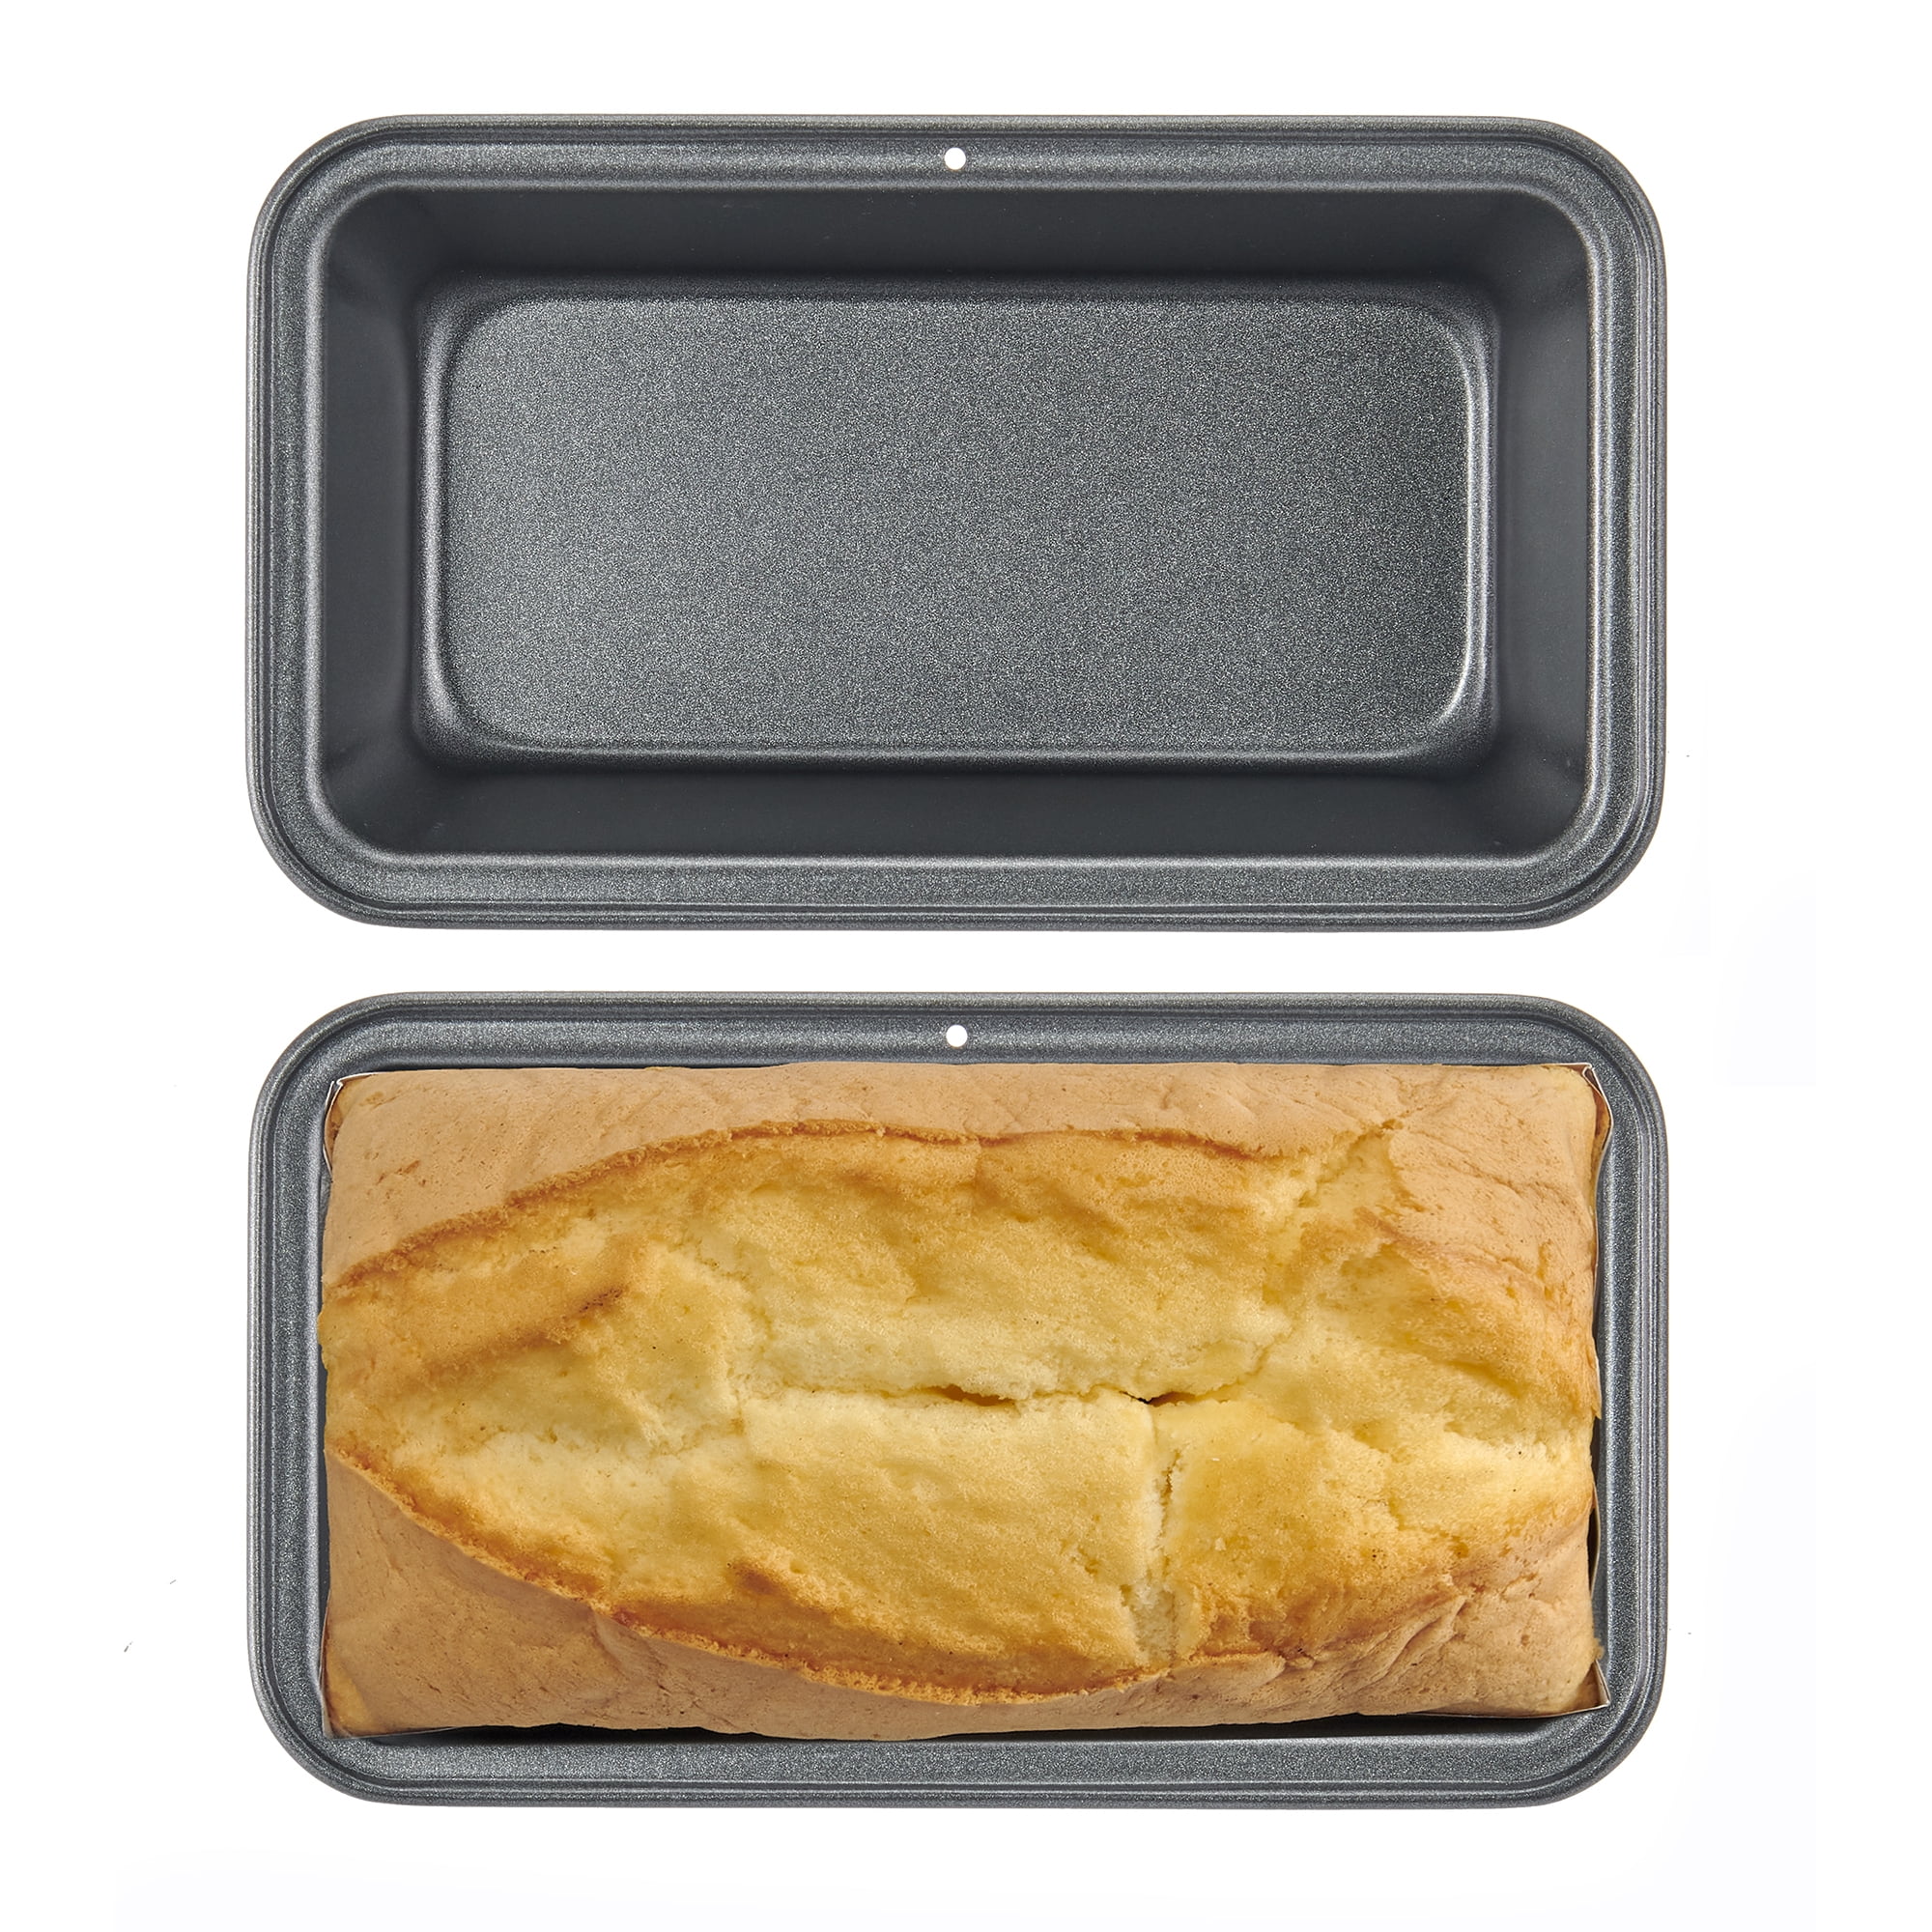 HAPPIELS Non-Toxic Nonstick Loaf Pan 9X5Inch 1lb Premium Quality Bread Pan - Easy to Clean, Premium Quality, Durable Bread Tin B